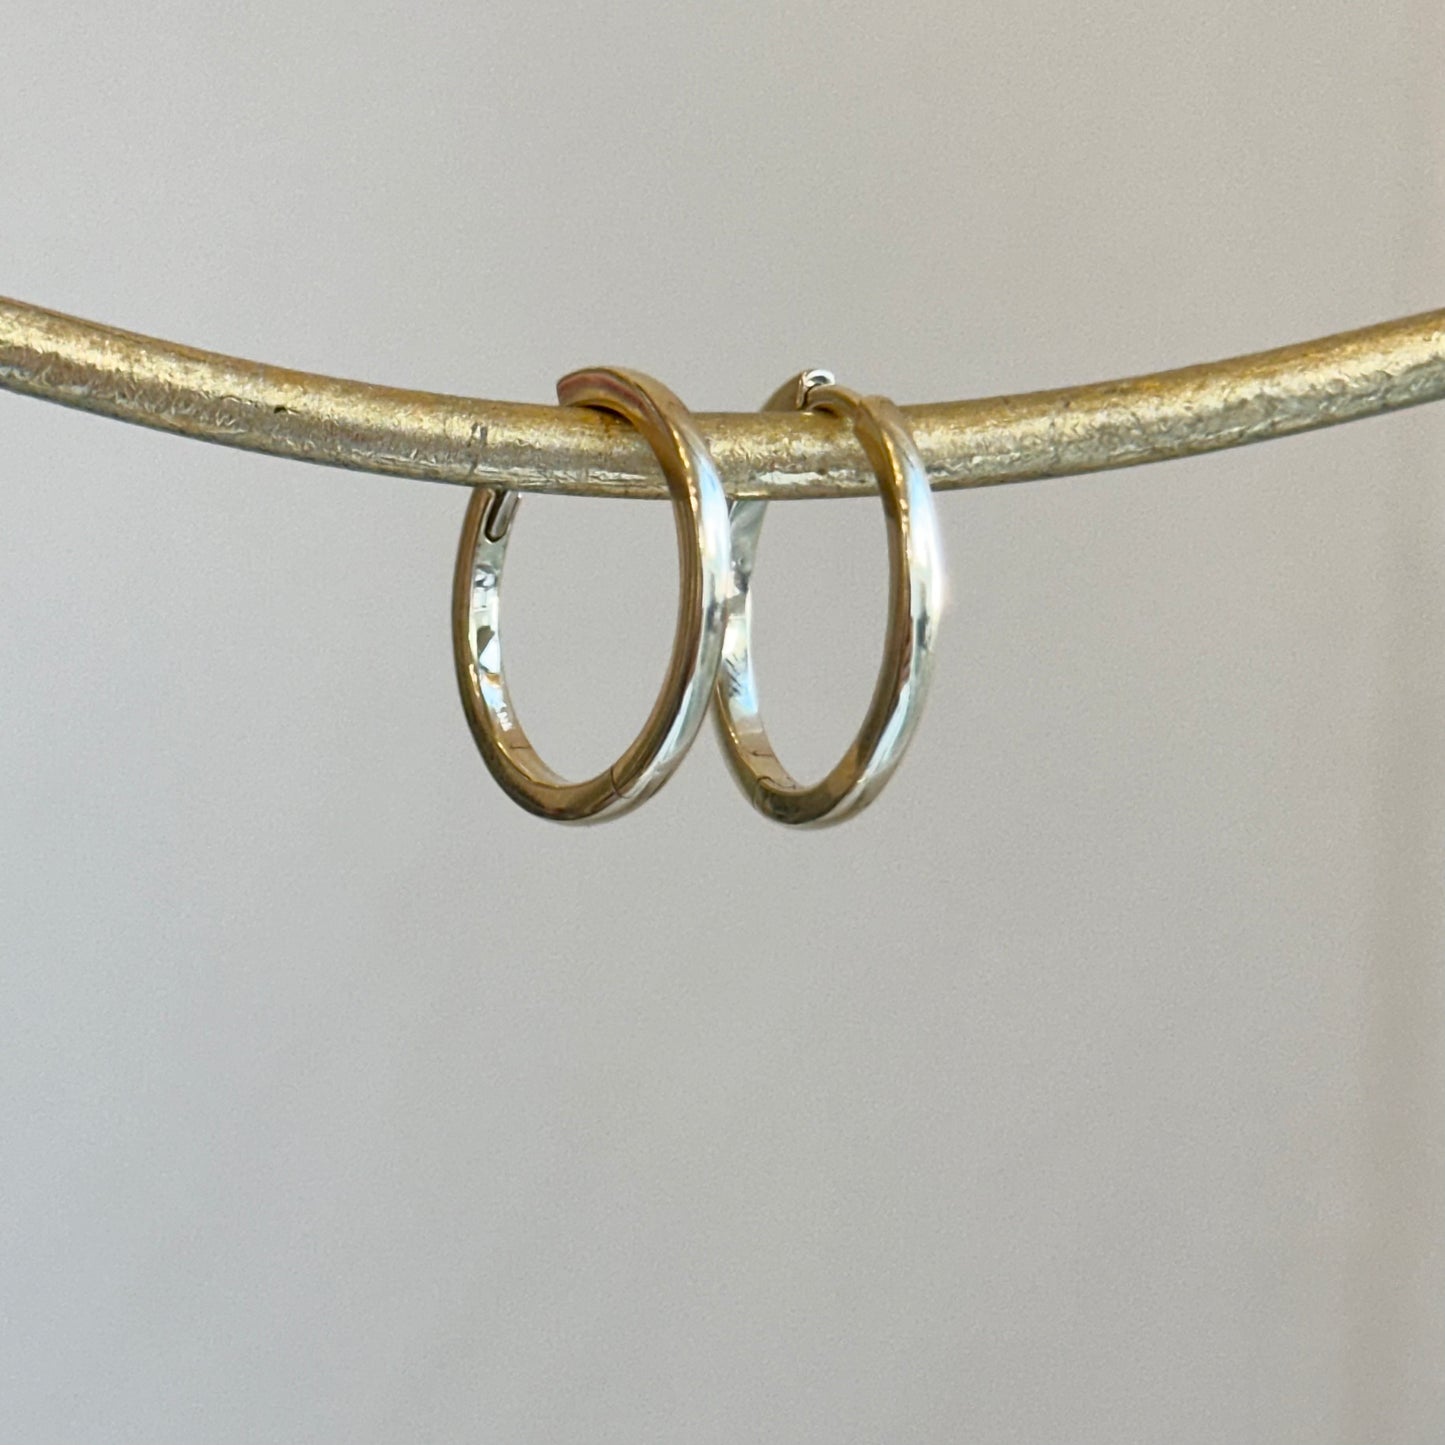 14KT Yellow Gold Thin Round Solid Hoop Earrings 18mm